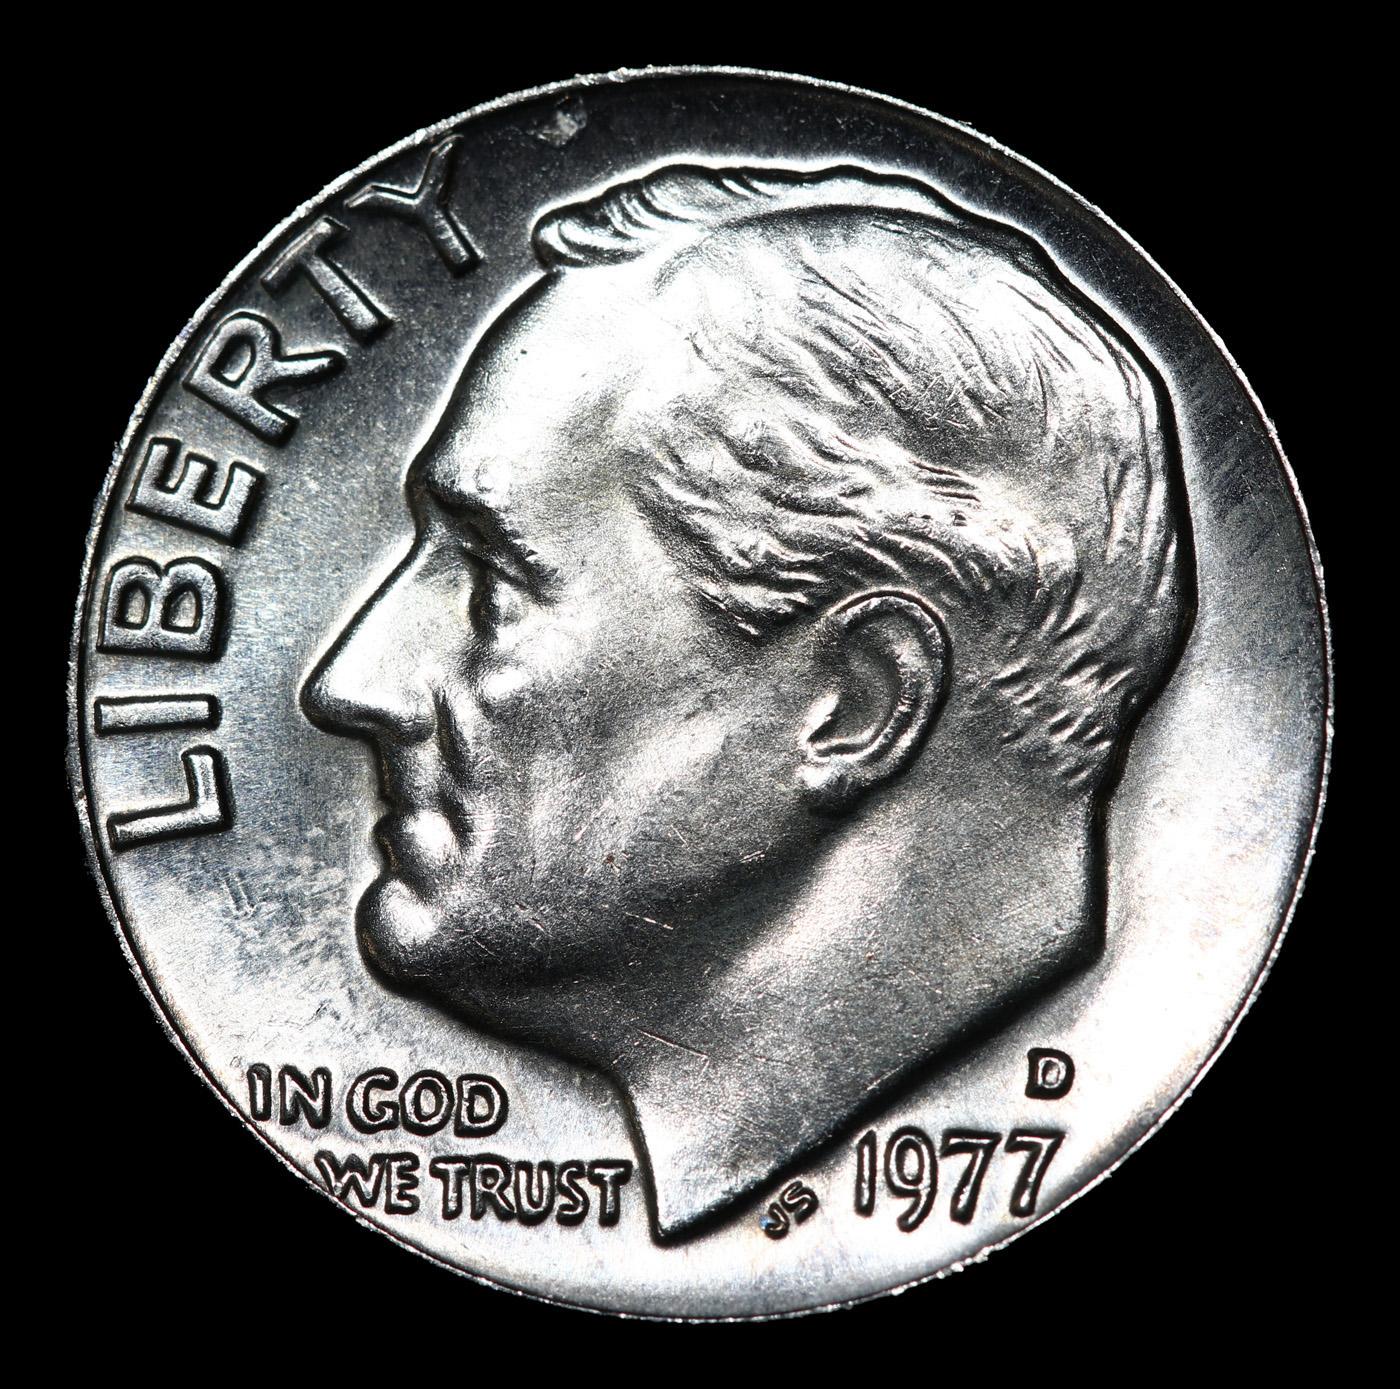 ***Auction Highlight*** 1977-d Roosevelt Dime Near Top Pop! 10c Graded ms68 BY SEGS (fc)